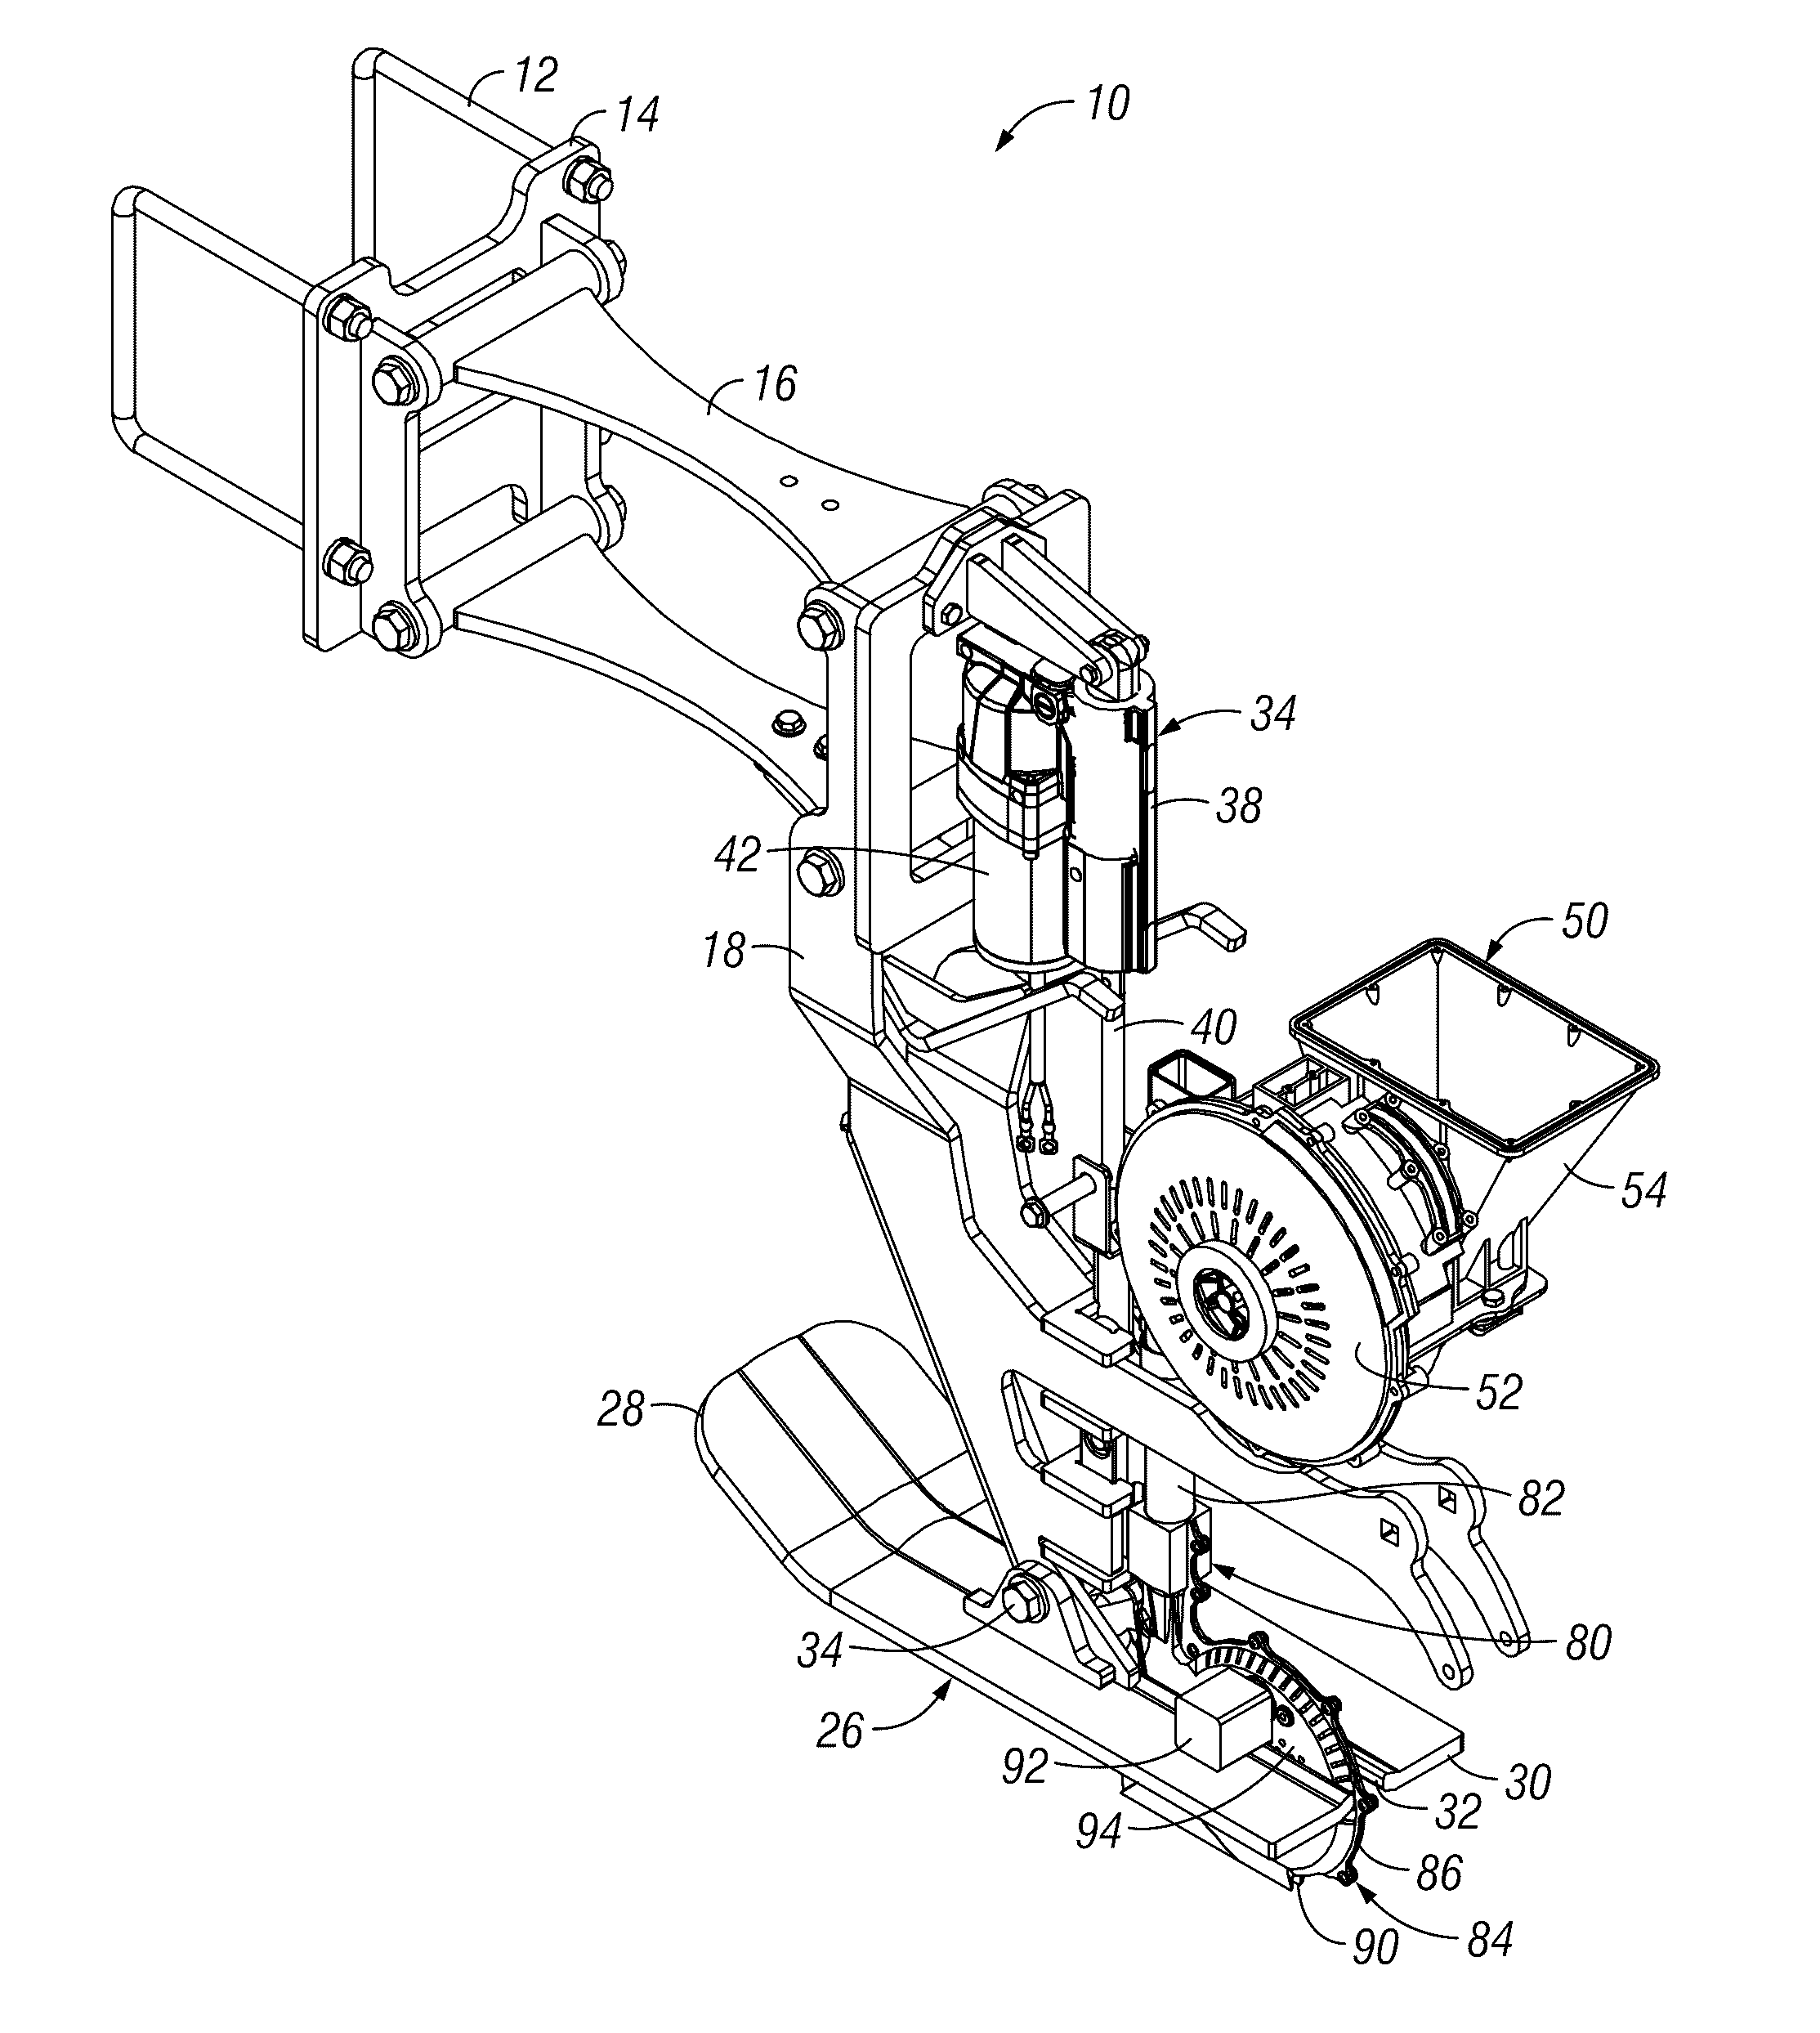 Row unit for an agricultural planting implement